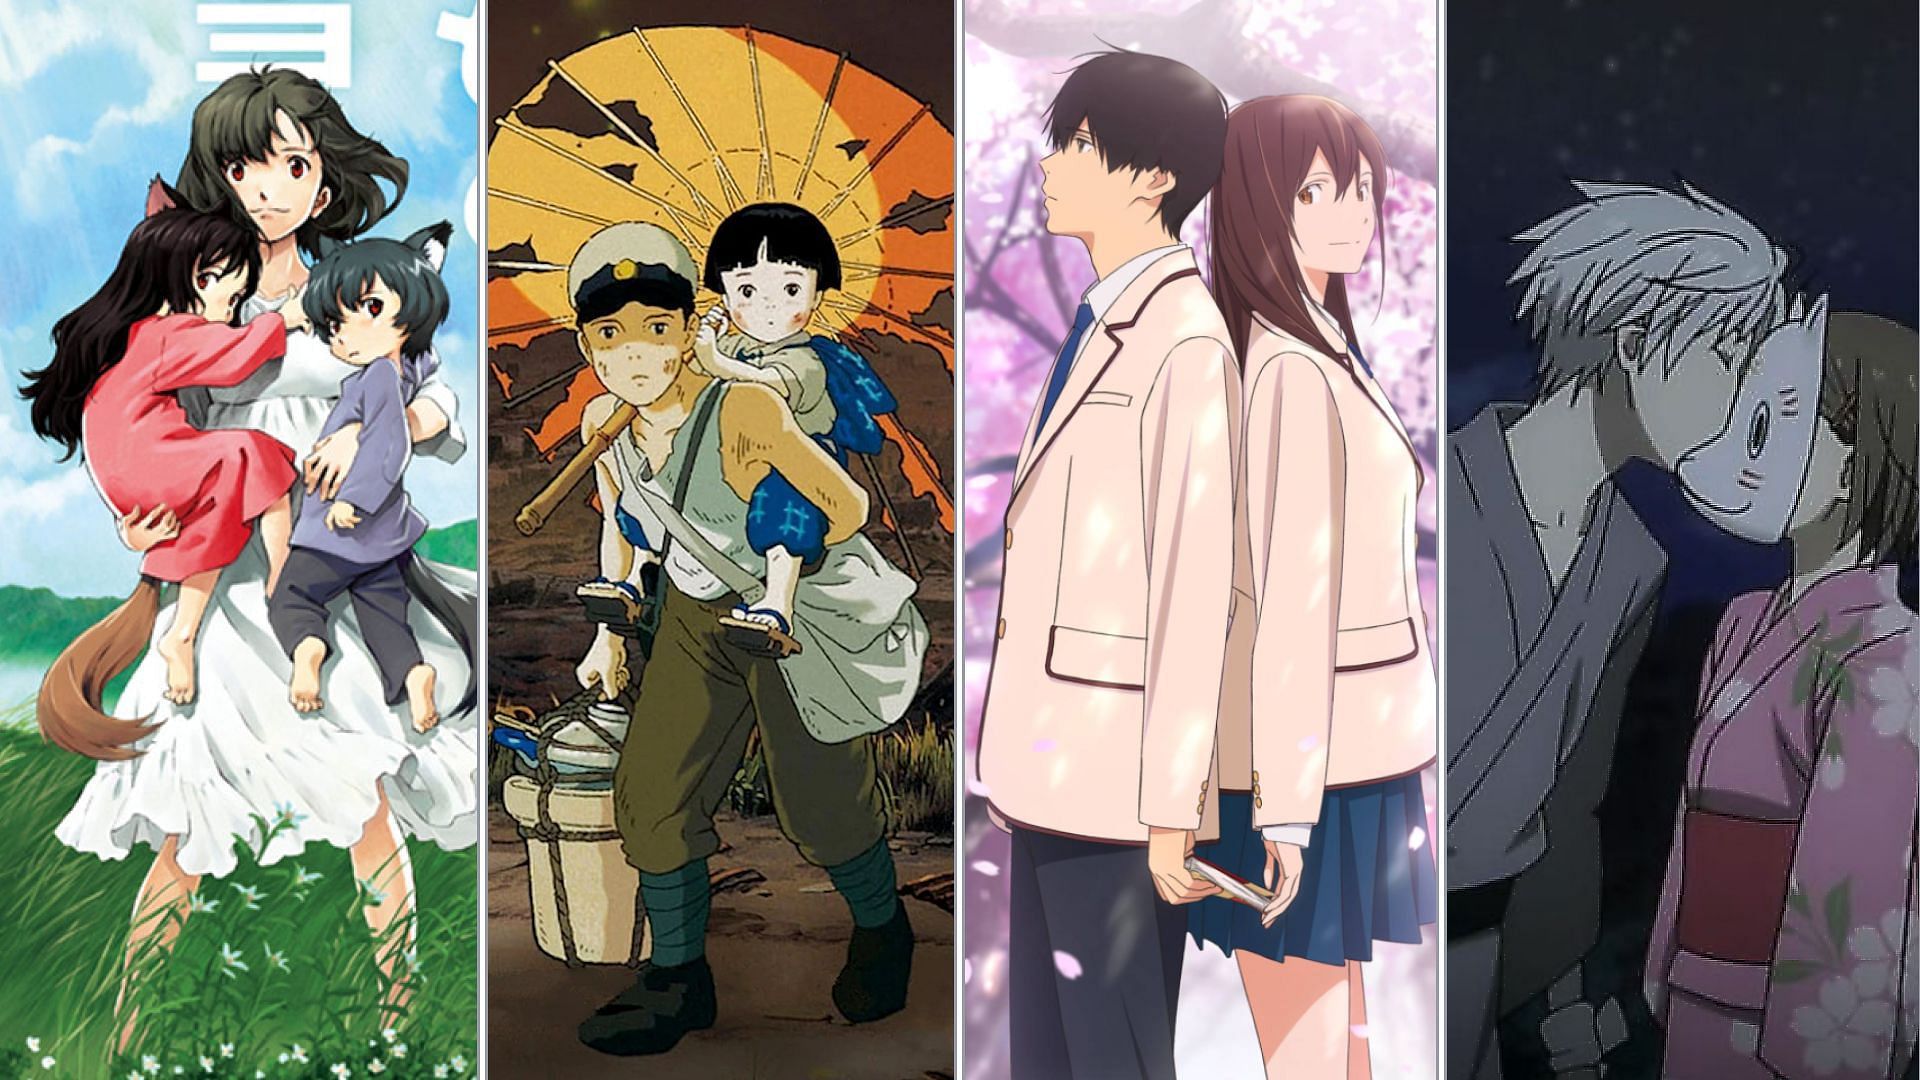 Grief & Anime: 5 Series to Help You Grieve - But Why Tho?